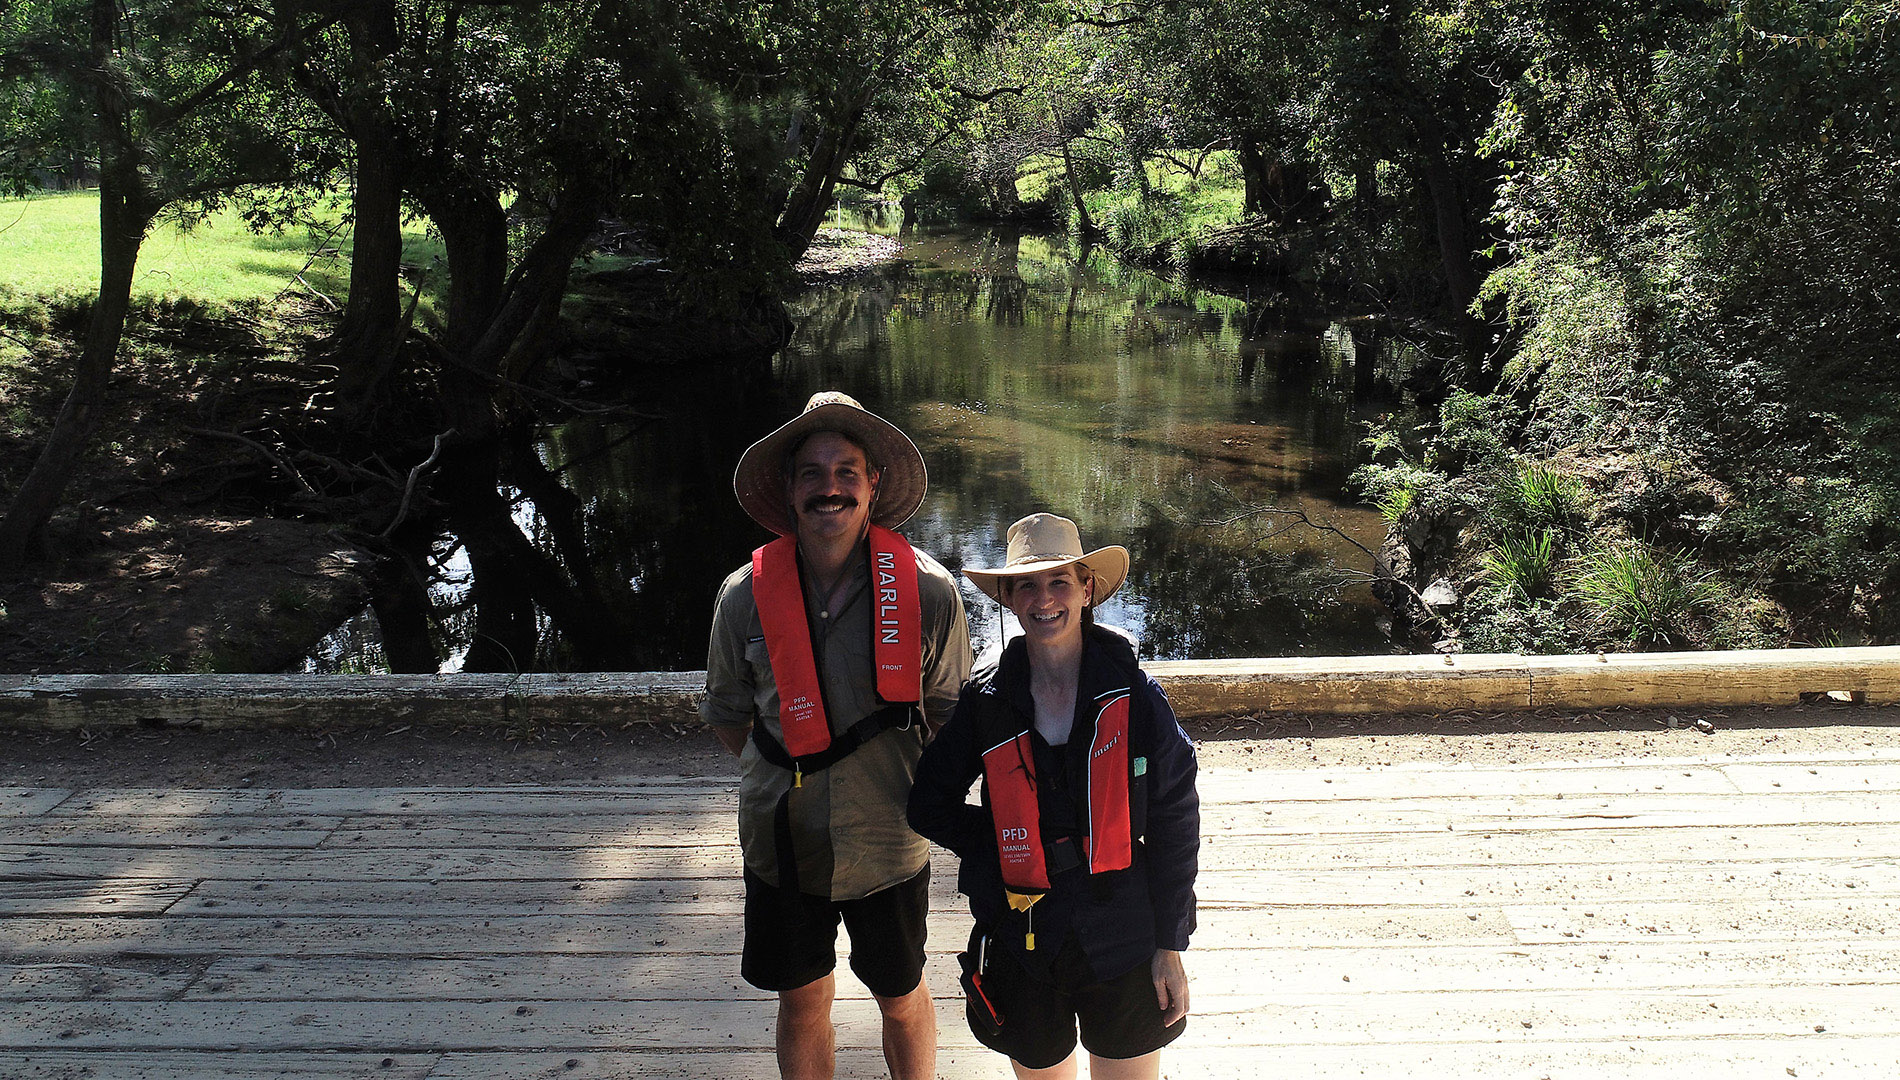 DPE scientists Jay Van Den Broek and Alison Lewis during a field trip in the Manning River catchment to survey for the endangered Manning River Turtle.